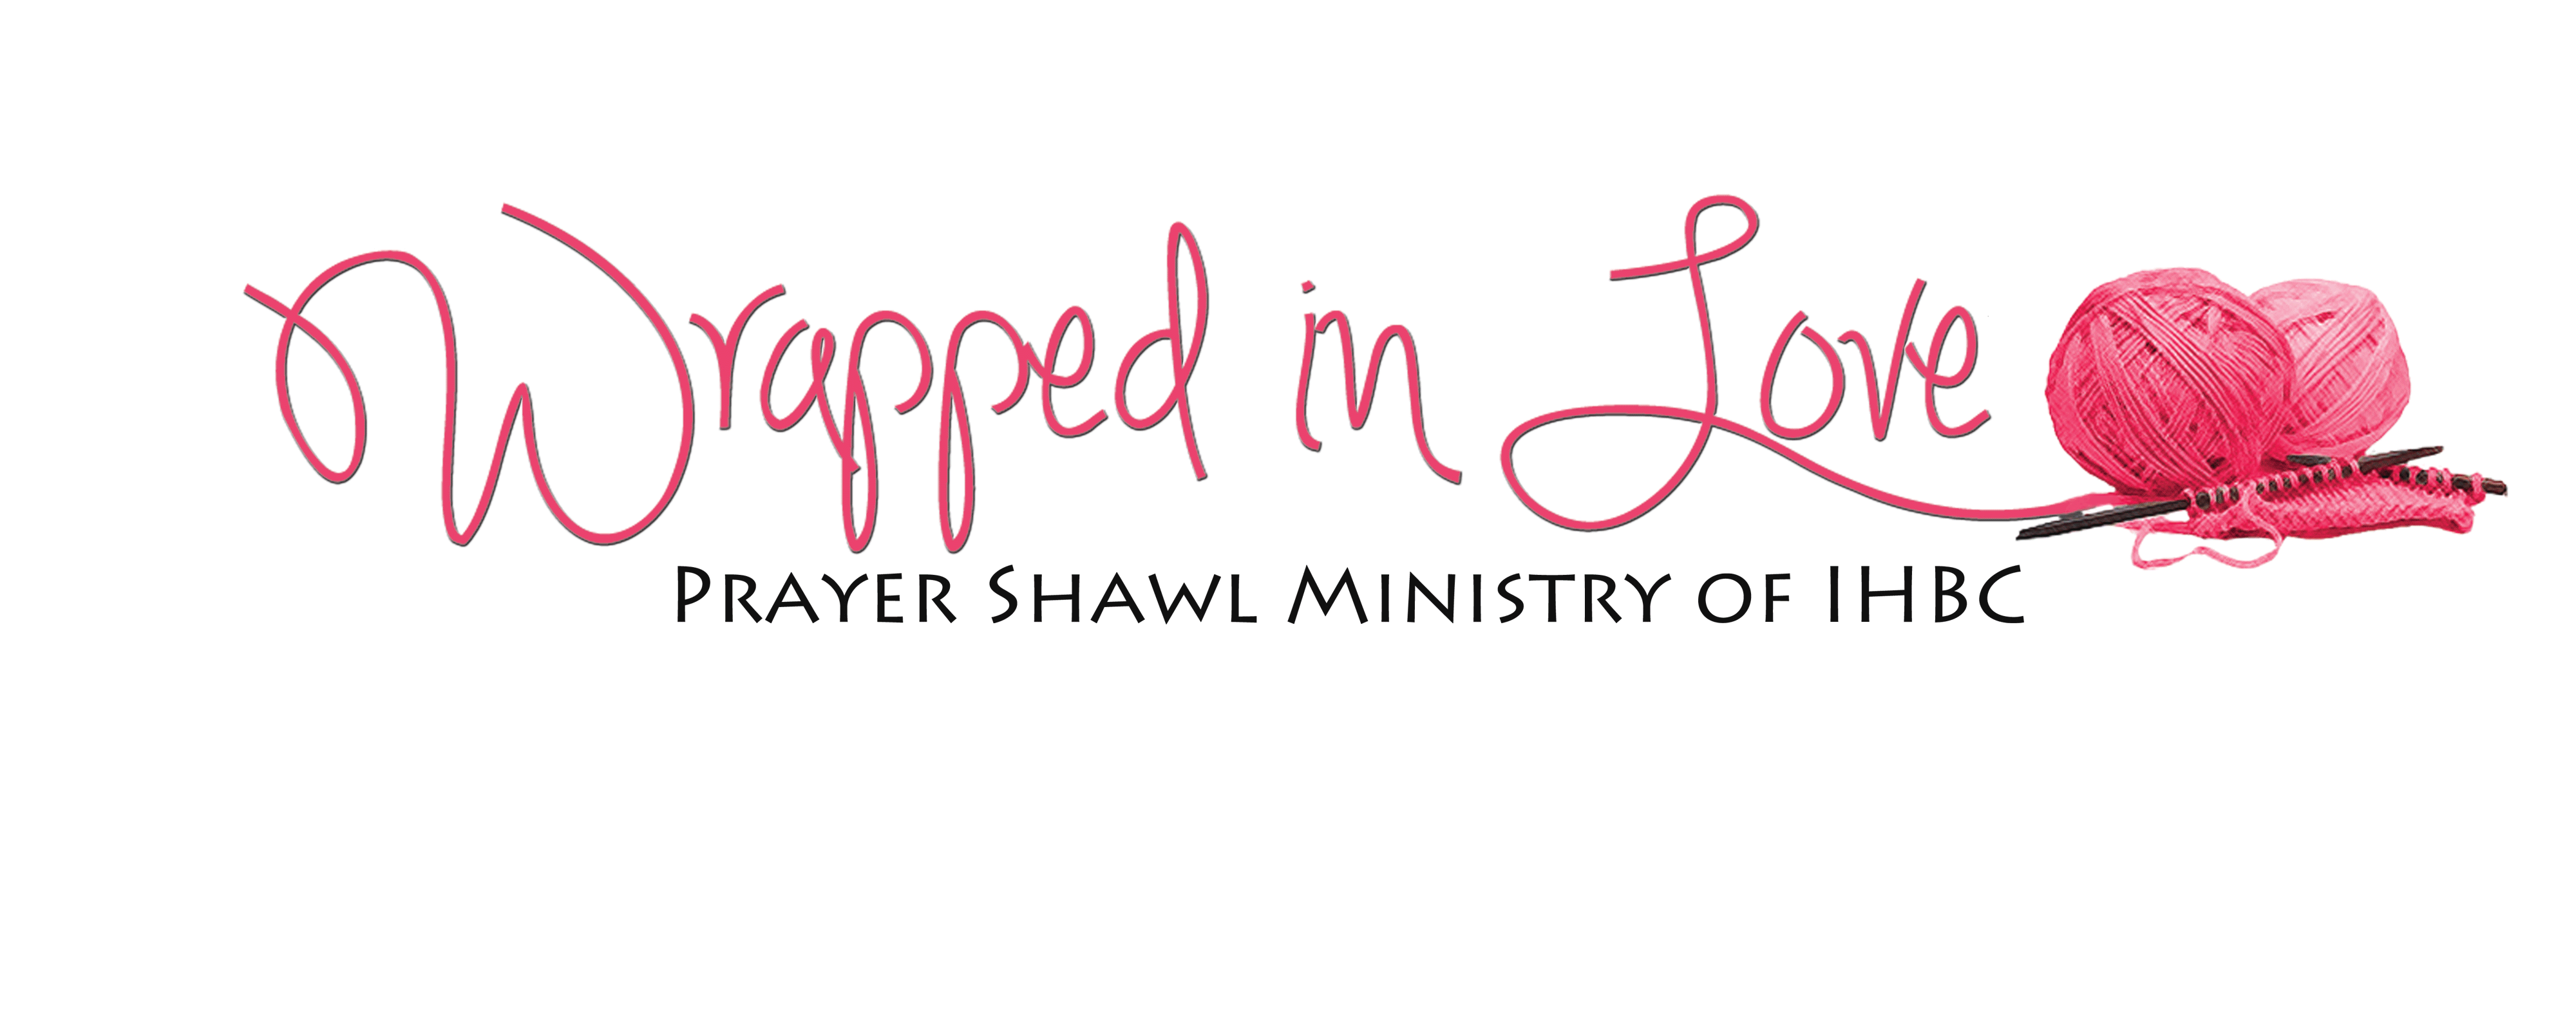 Prayer Shawl Ministry Clipart   Cliparthut   Free Clipart